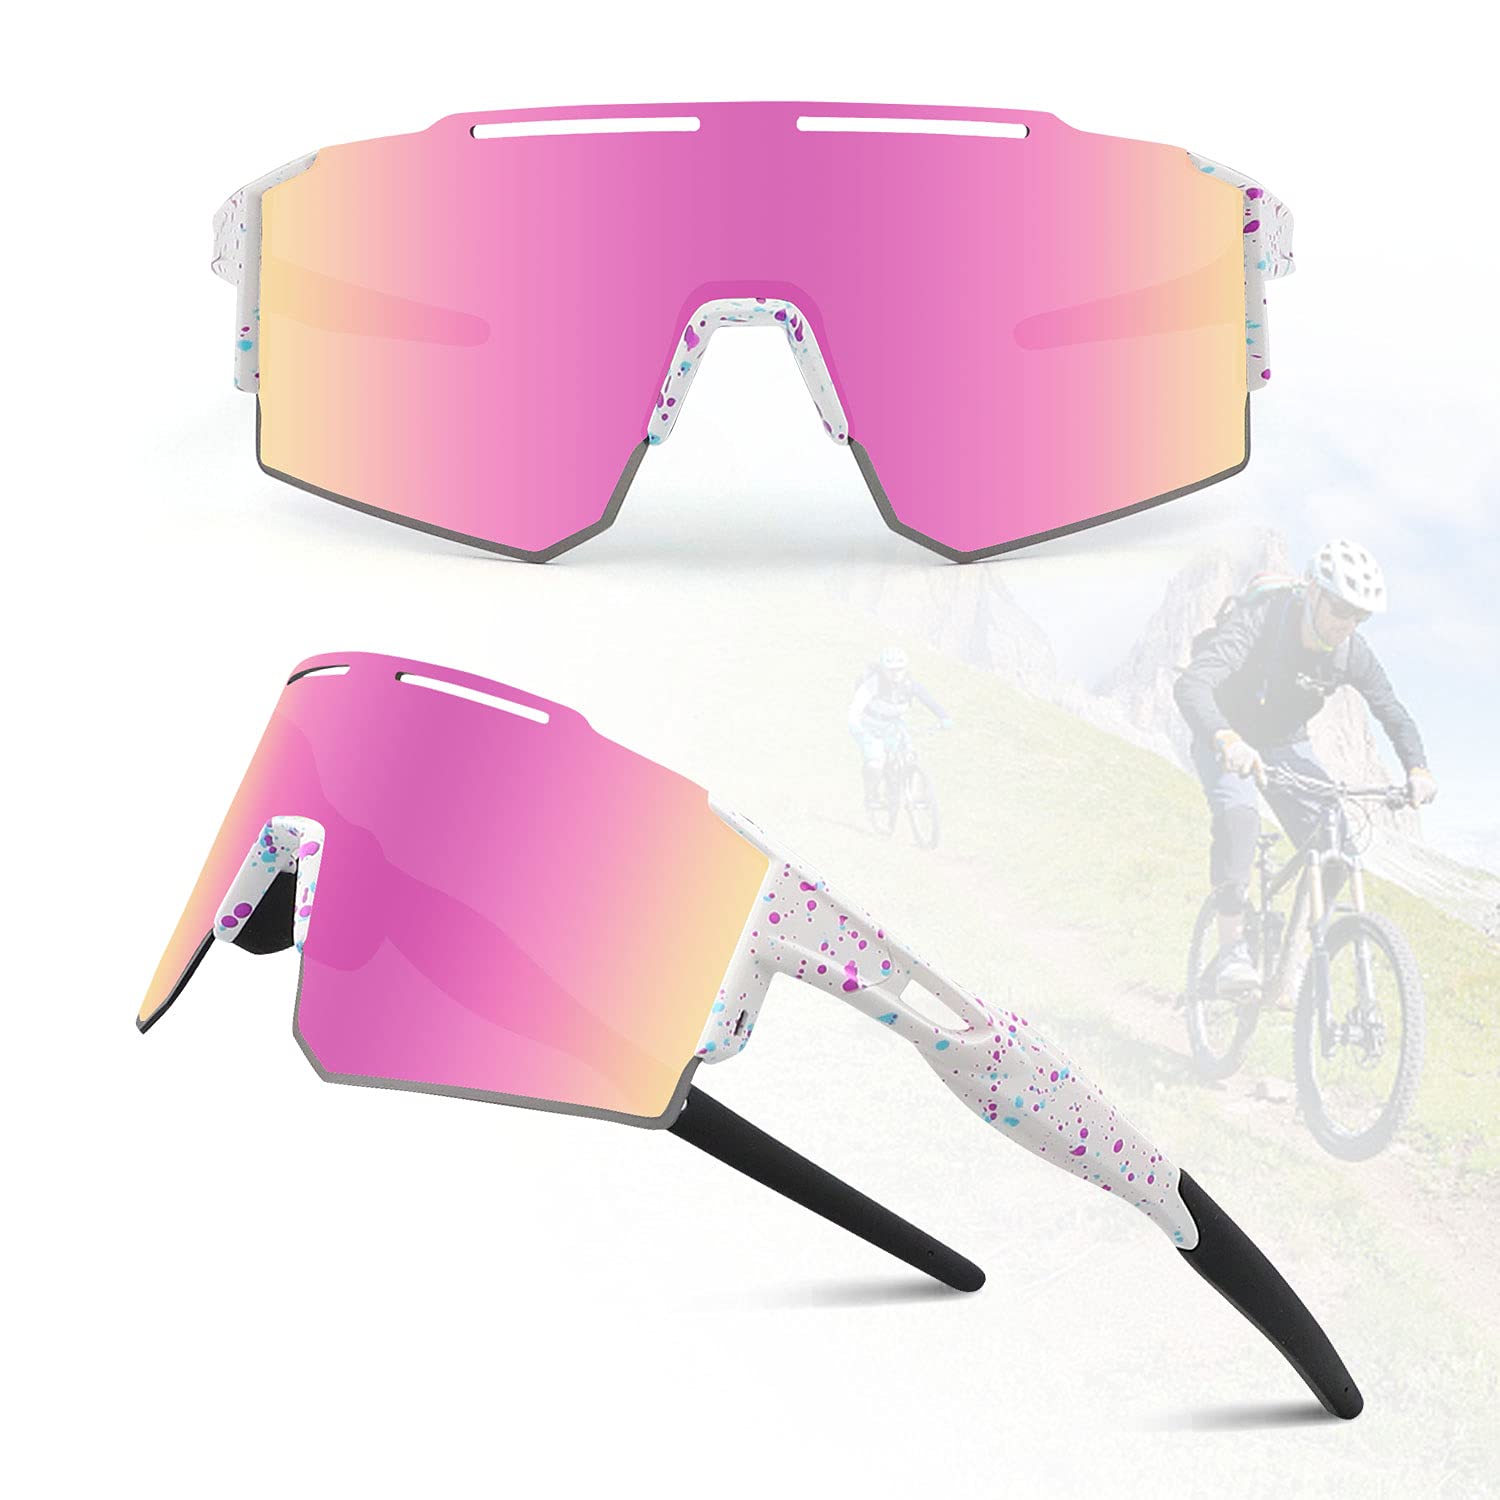 Ukoly Cycling Sunglasses for Men Women with 3 Interchangeable